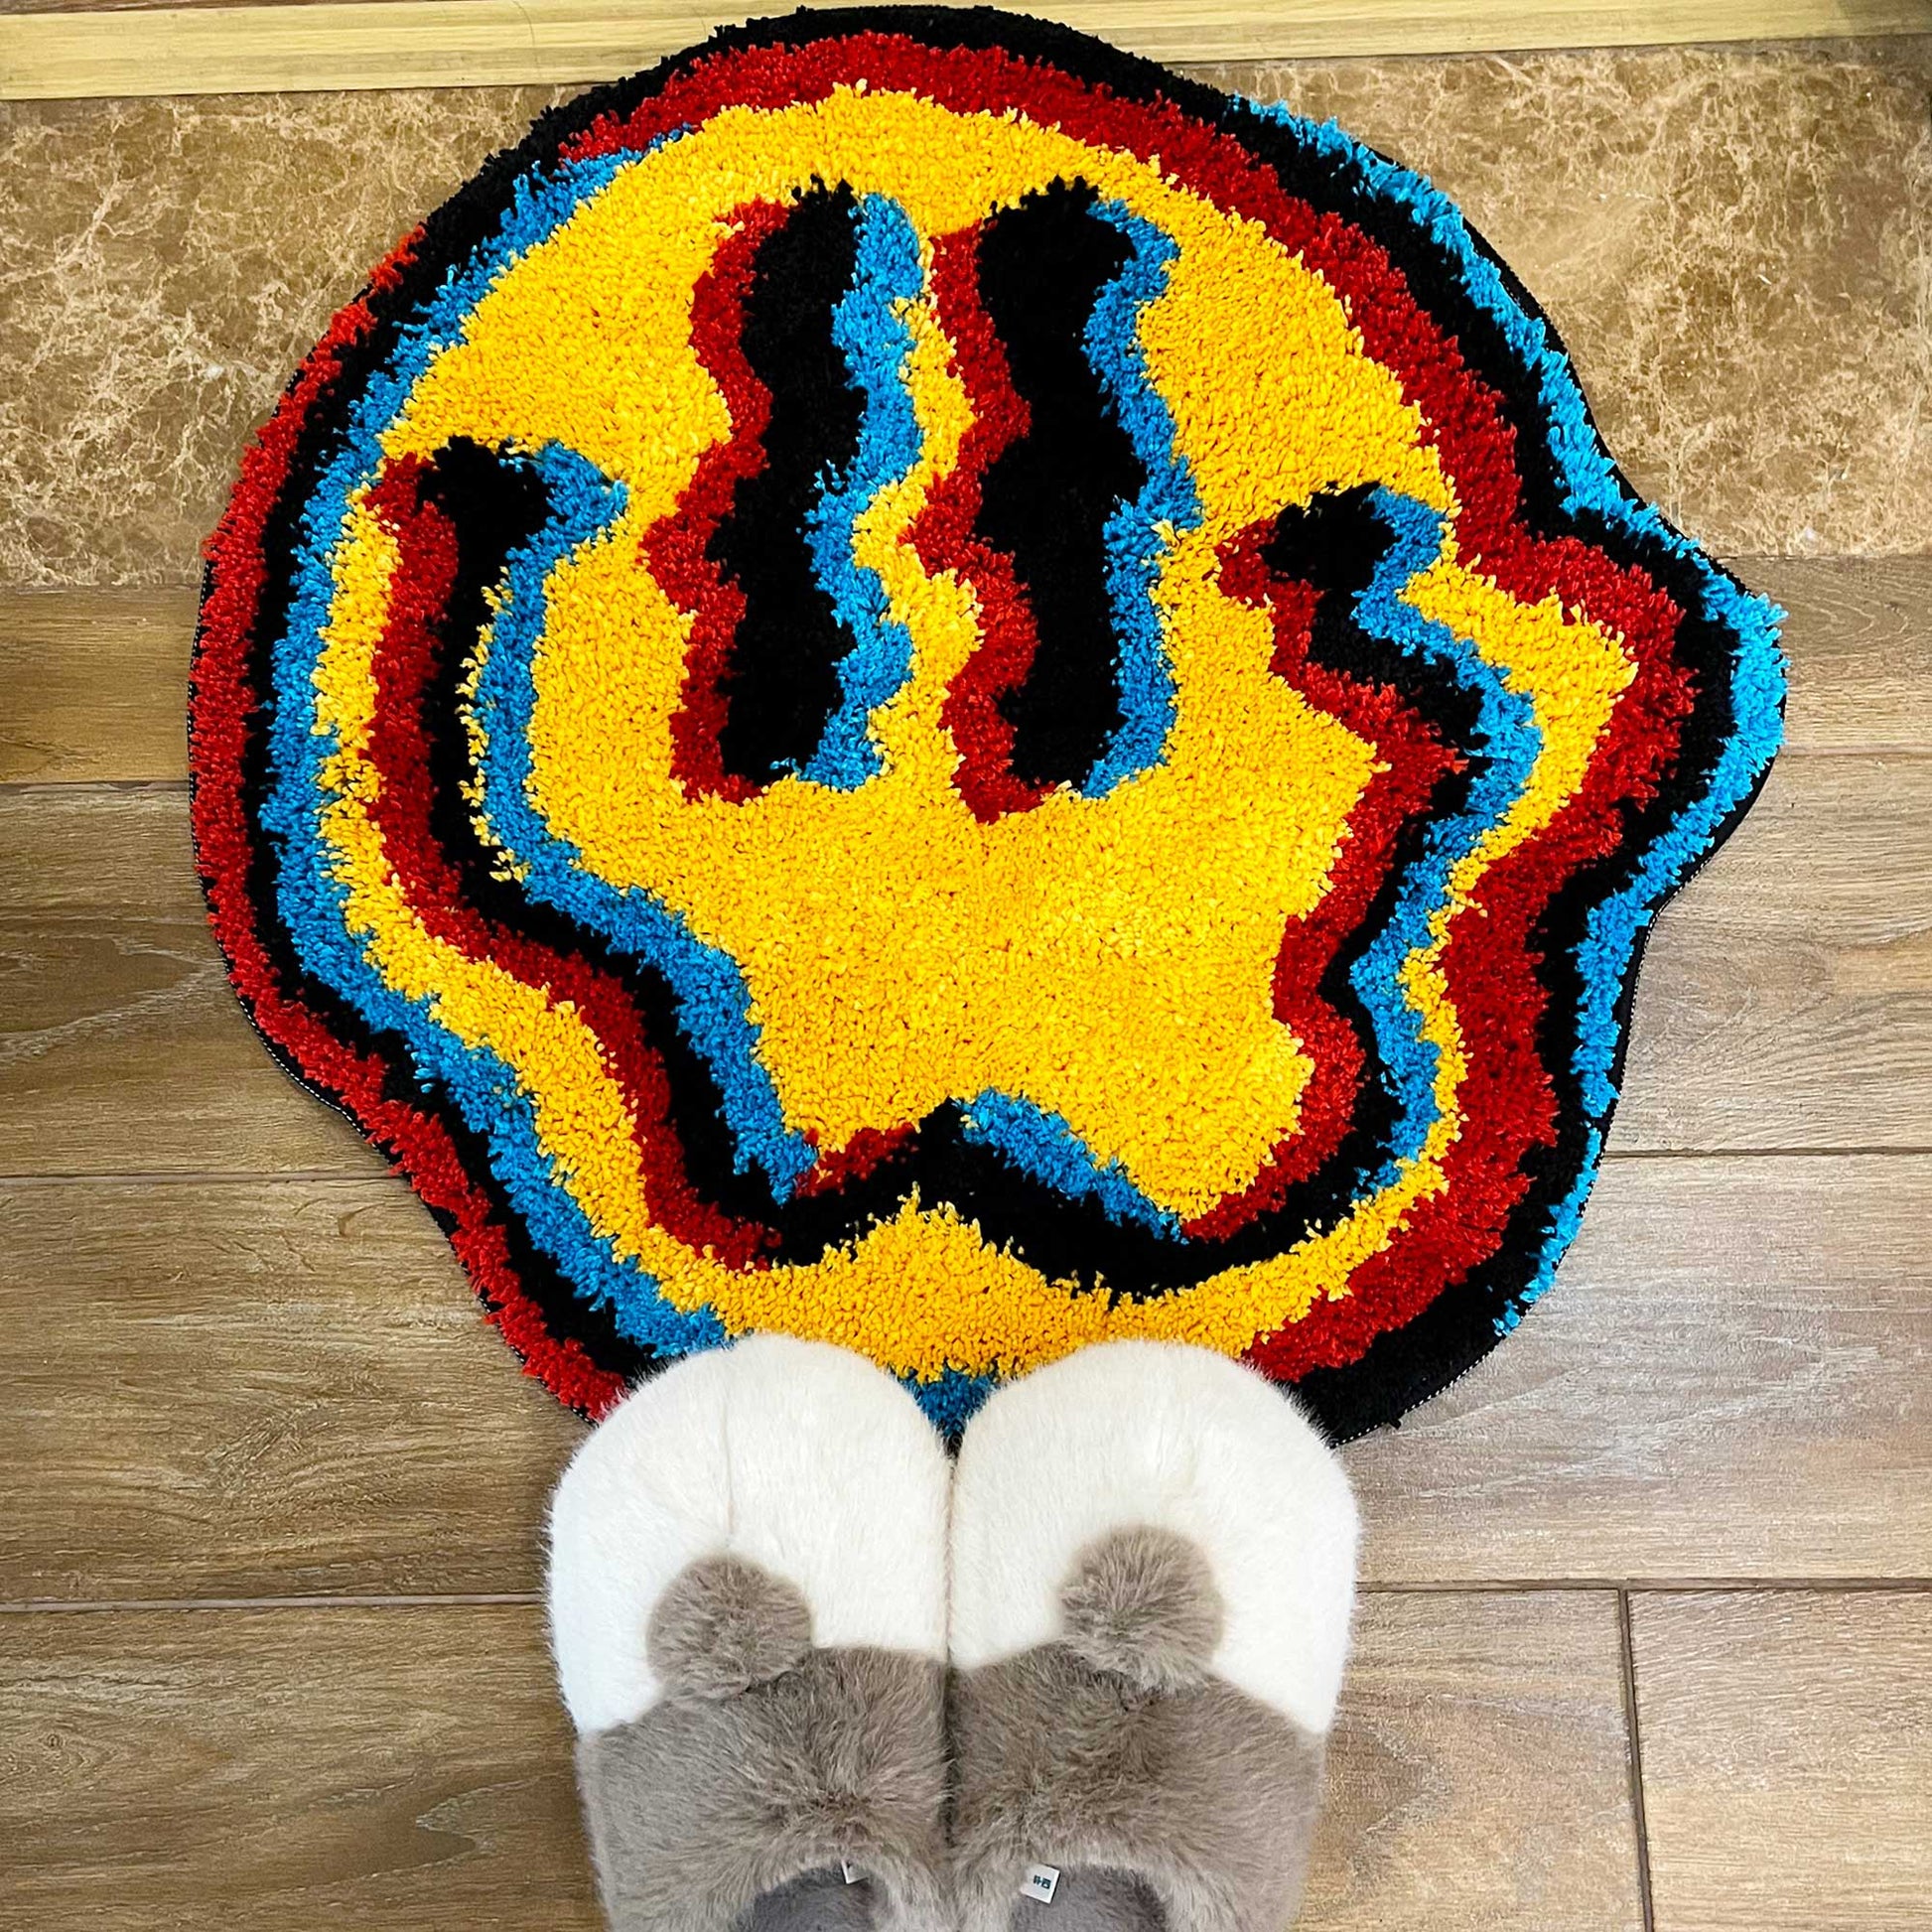 Tufted Rug LSD Trippy Smiley Face Rug Front in an Entryway